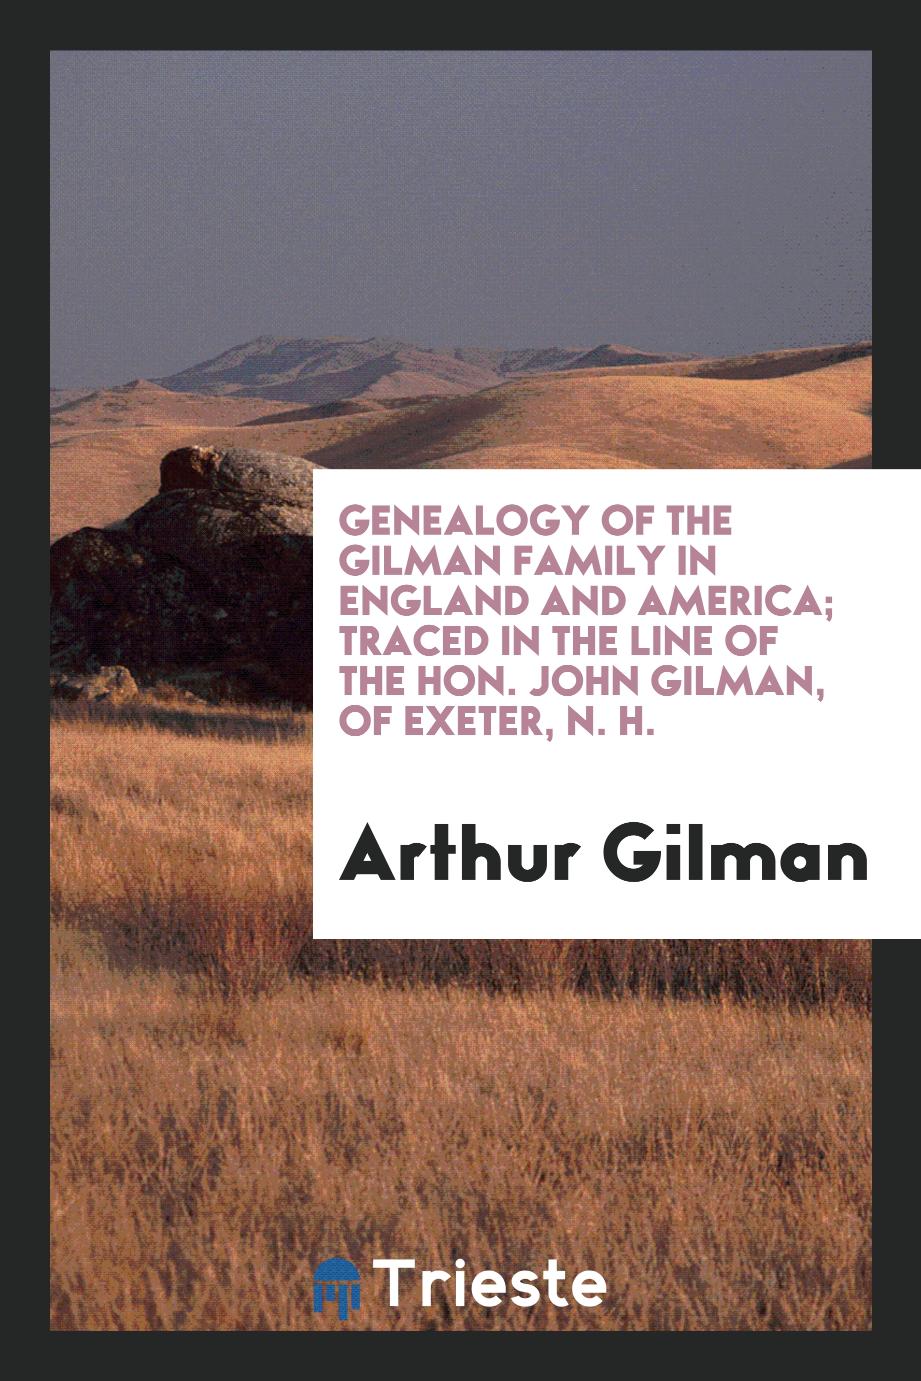 Genealogy of the Gilman Family in England and America; Traced in the Line of the Hon. John Gilman, of Exeter, N. H.